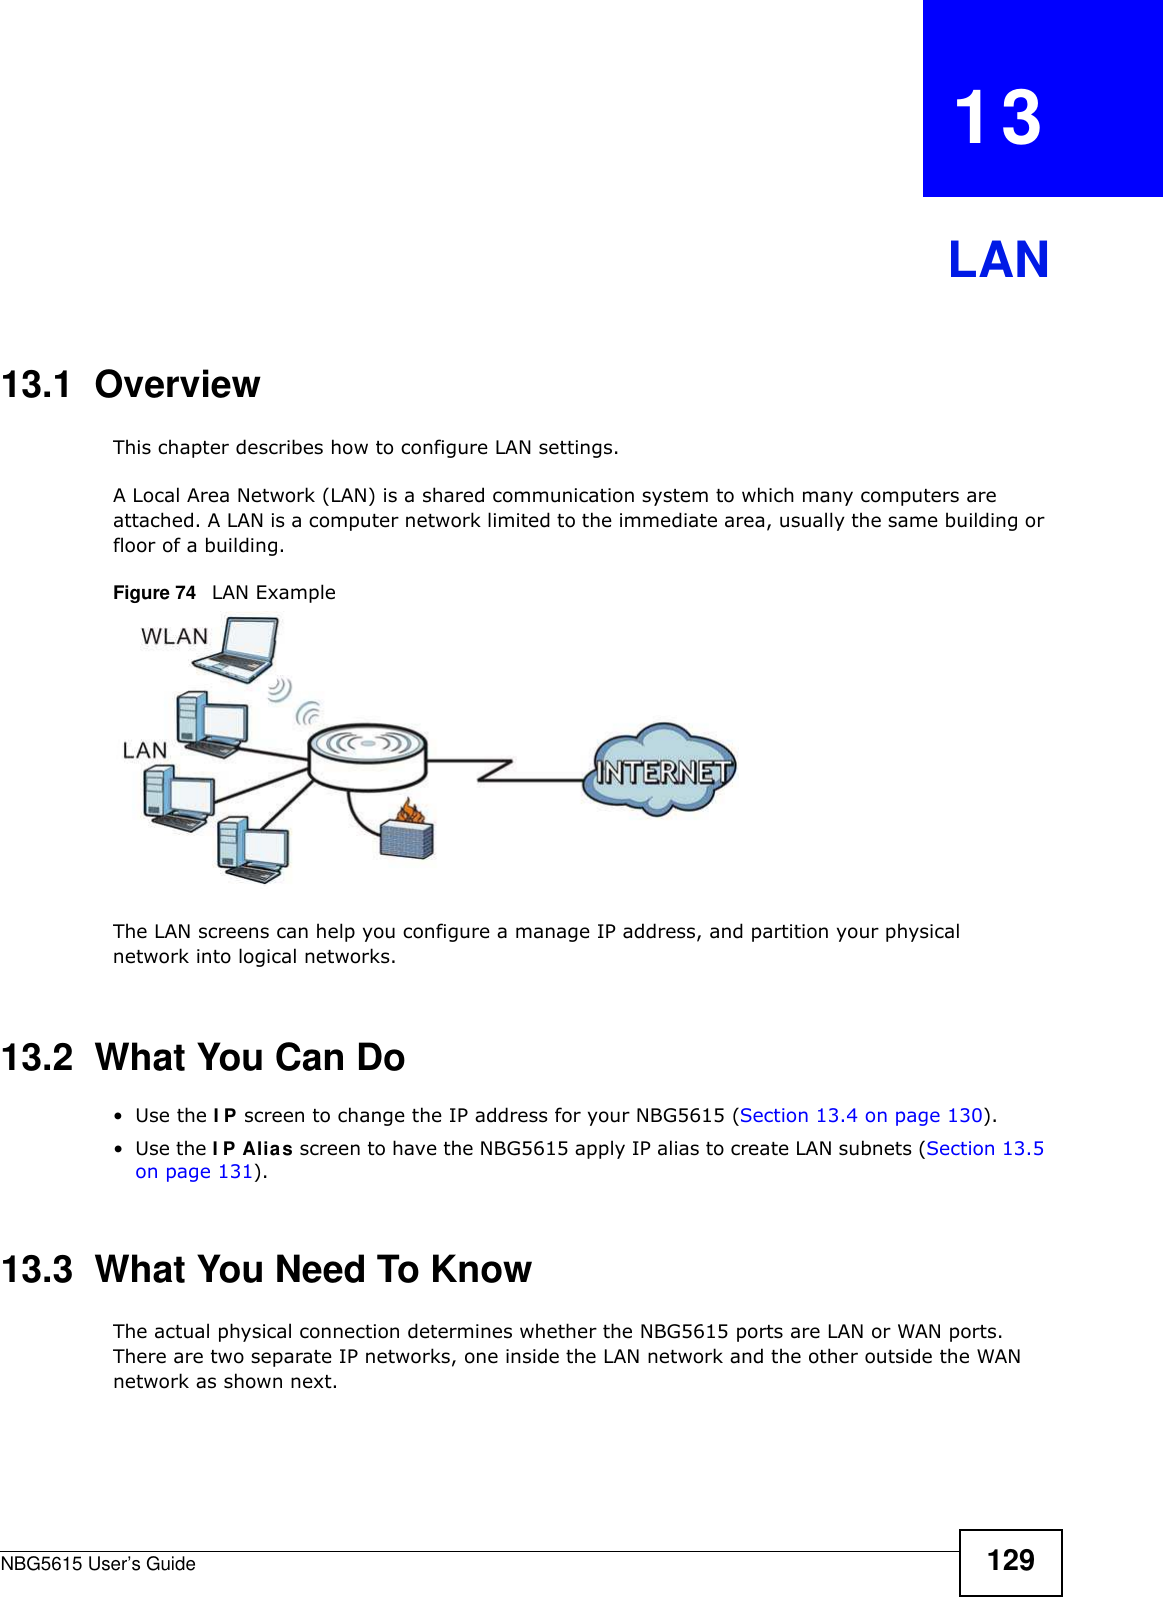 NBG5615 User’s Guide 129CHAPTER   13LAN13.1  OverviewThis chapter describes how to configure LAN settings.A Local Area Network (LAN) is a shared communication system to which many computers are attached. A LAN is a computer network limited to the immediate area, usually the same building or floor of a building. Figure 74   LAN ExampleThe LAN screens can help you configure a manage IP address, and partition your physical network into logical networks.13.2  What You Can Do•Use the I P screen to change the IP address for your NBG5615 (Section 13.4 on page 130).•Use the I P Alias screen to have the NBG5615 apply IP alias to create LAN subnets (Section 13.5 on page 131).13.3  What You Need To KnowThe actual physical connection determines whether the NBG5615 ports are LAN or WAN ports. There are two separate IP networks, one inside the LAN network and the other outside the WAN network as shown next.